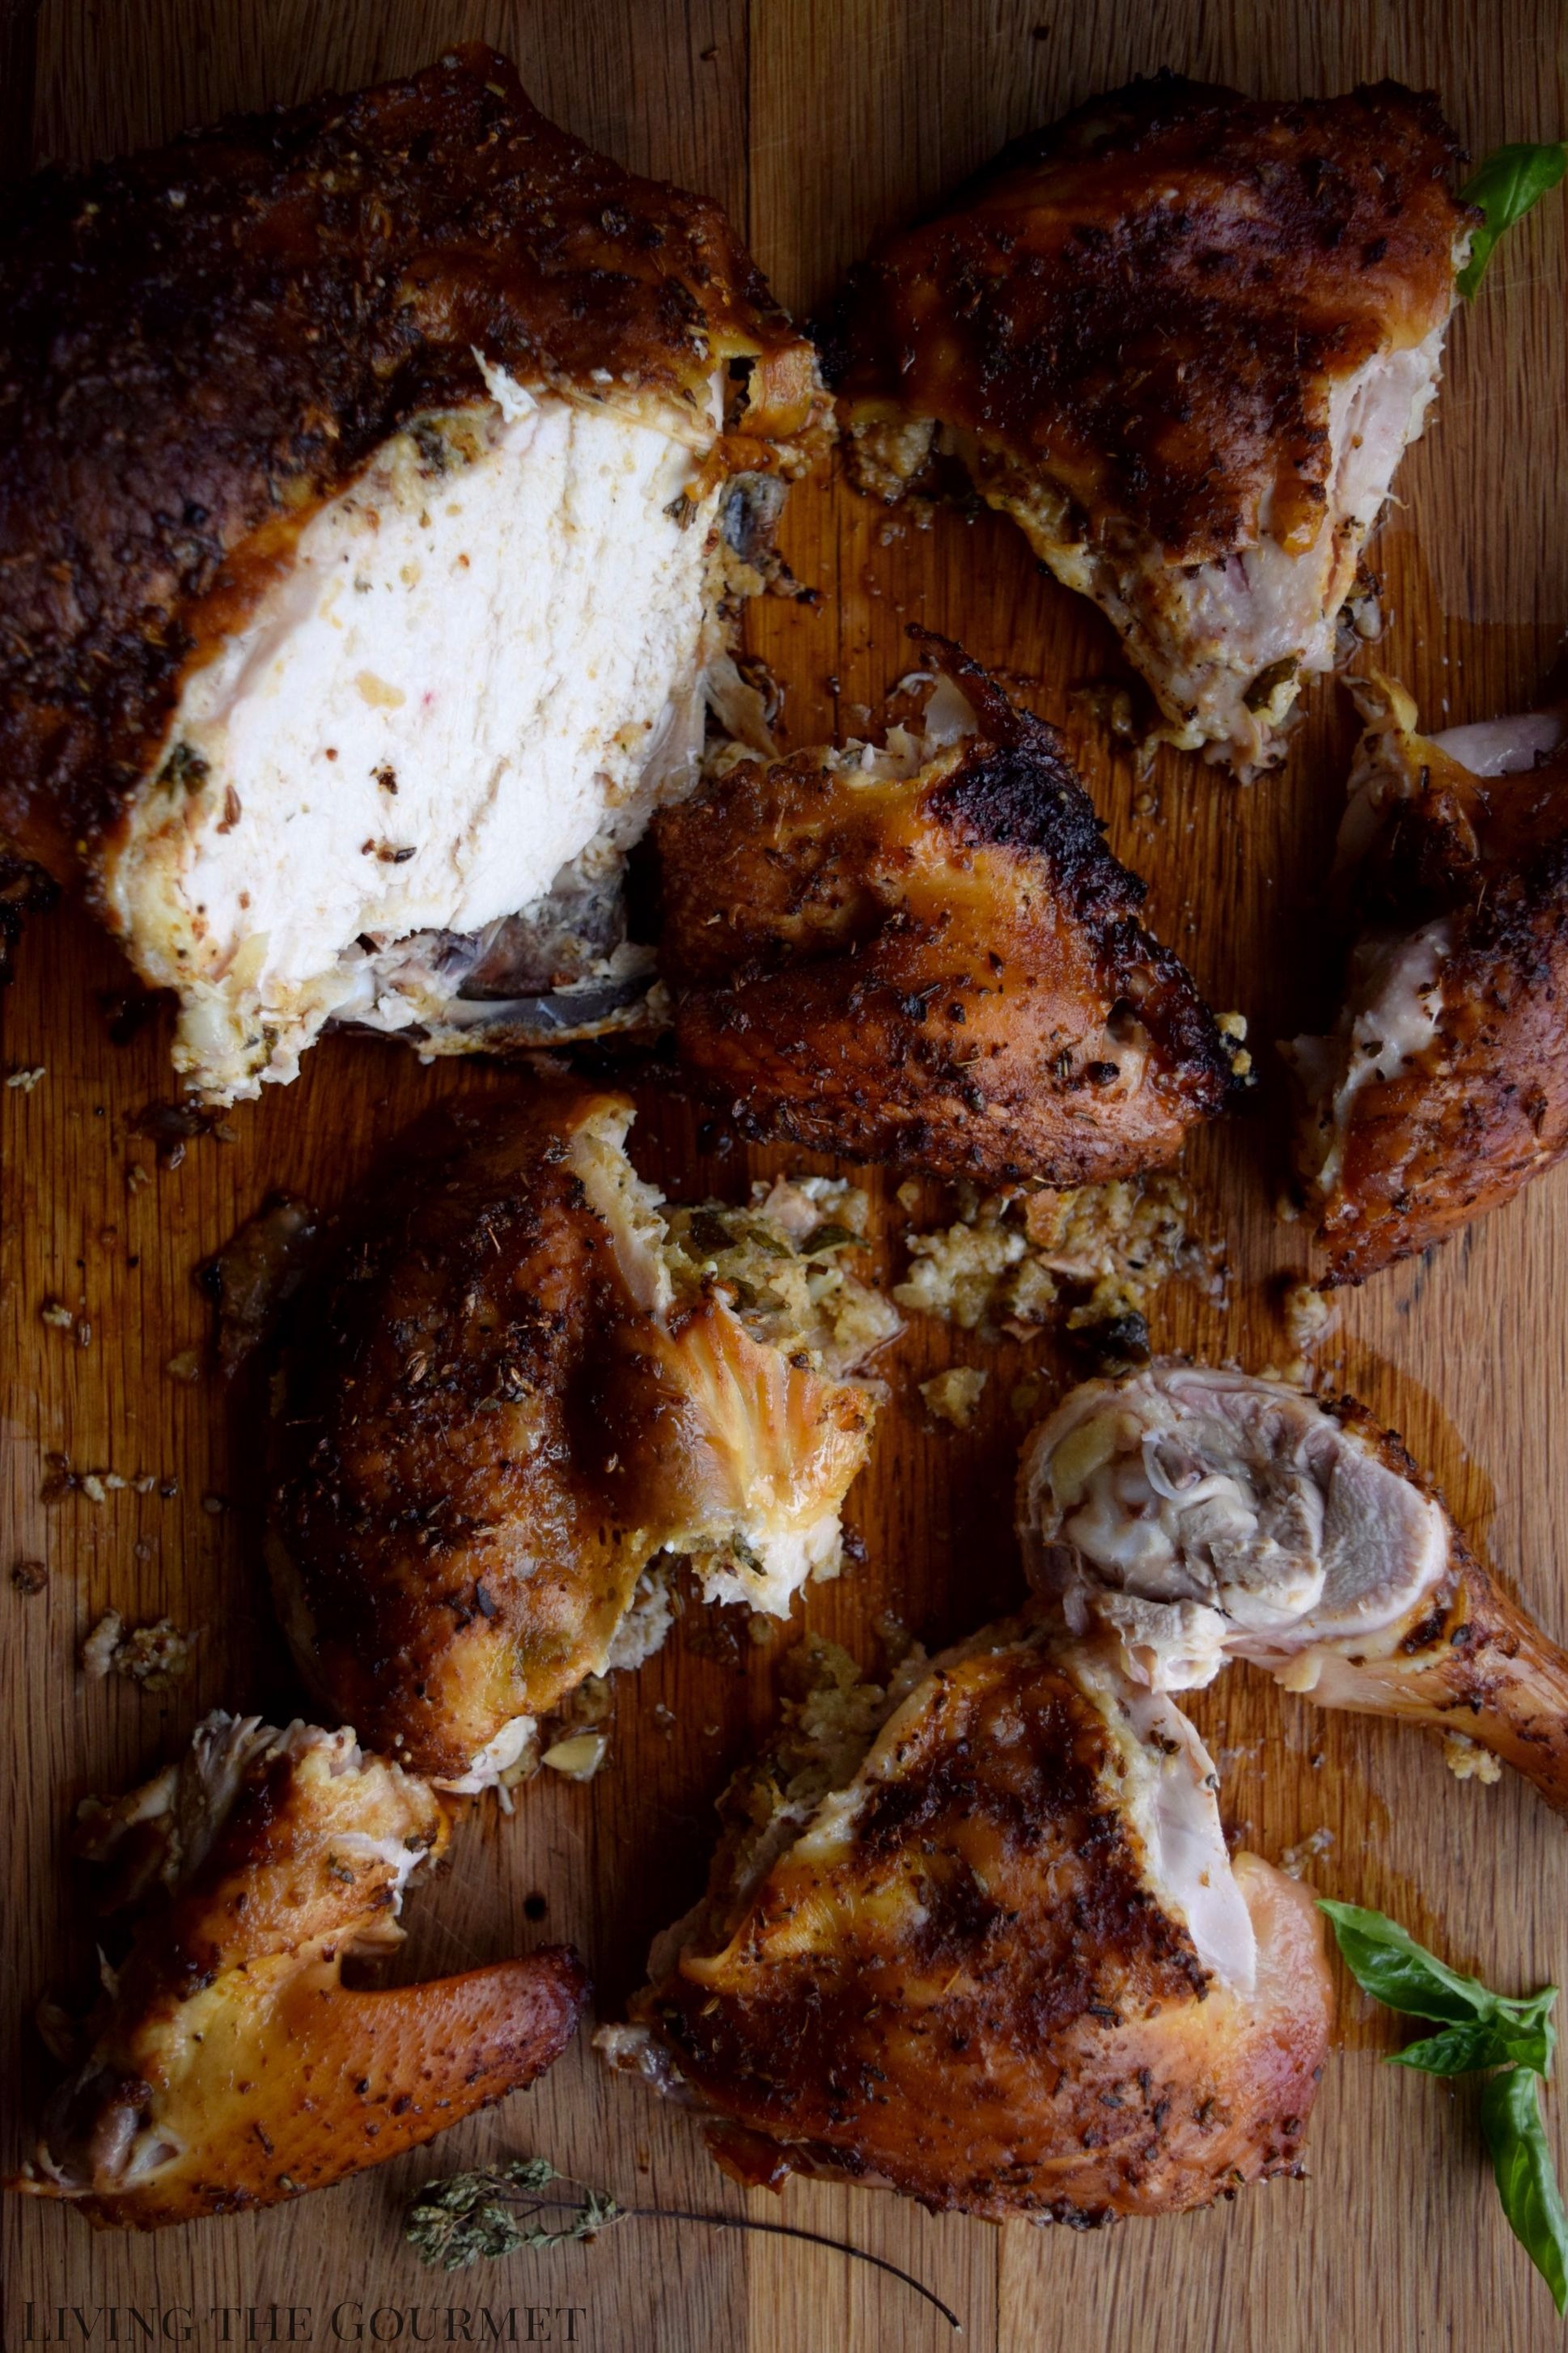 Living the Gourmet: Spatchcocked Chicken is a simple technique that will guarantee a perfectly cooked chicken throughout. Grill it up on the BBQ for a delicious and easy meal.